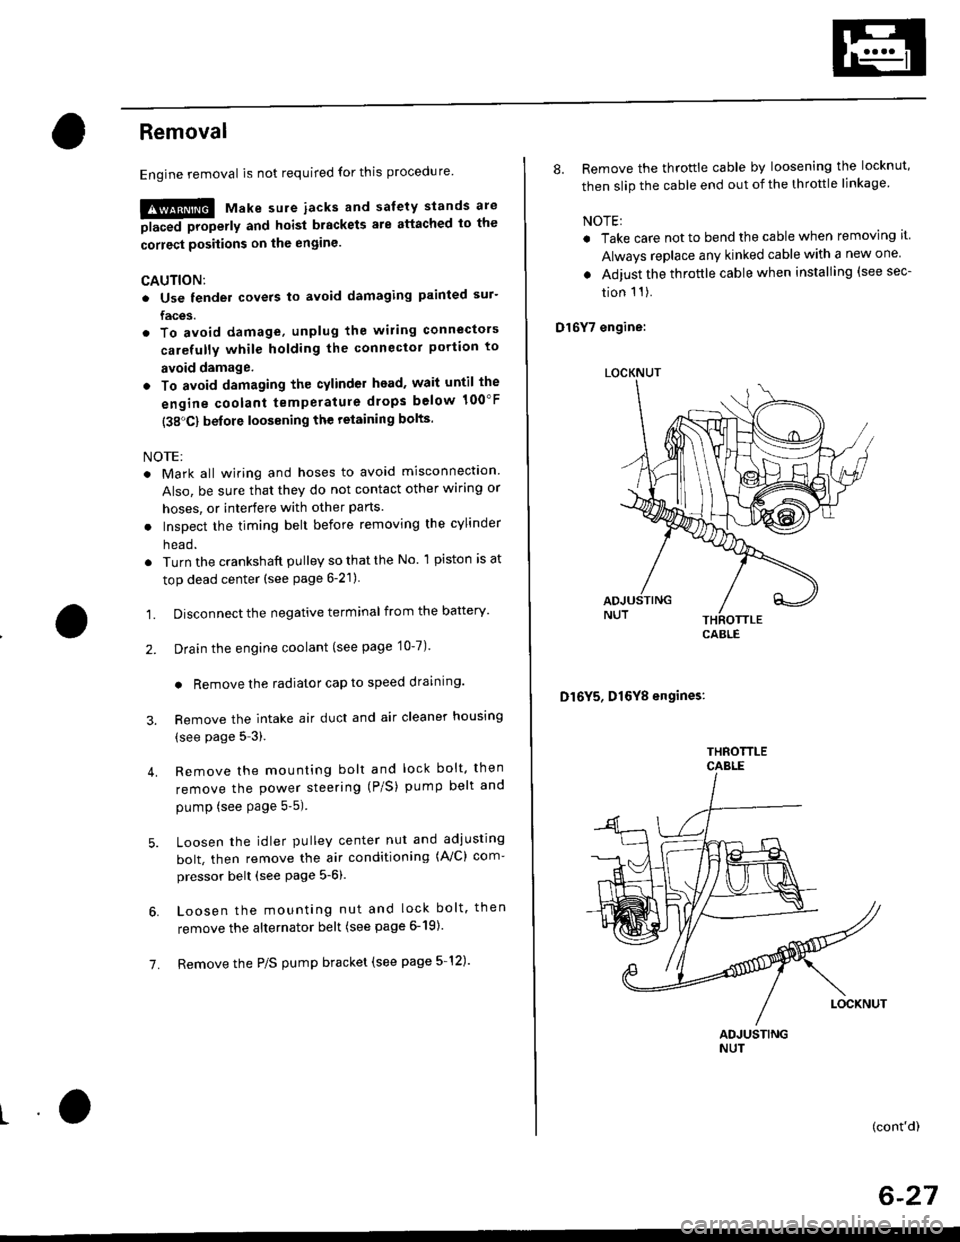 HONDA CIVIC 1997 6.G Workshop Manual Removal
Engine removal is not required for this procedure
!!!s@ Make sure iacks and salety stands are
f ta"eata"ea propetty and hoist brackets are attached to the
correct positions on the engine.
CAUT